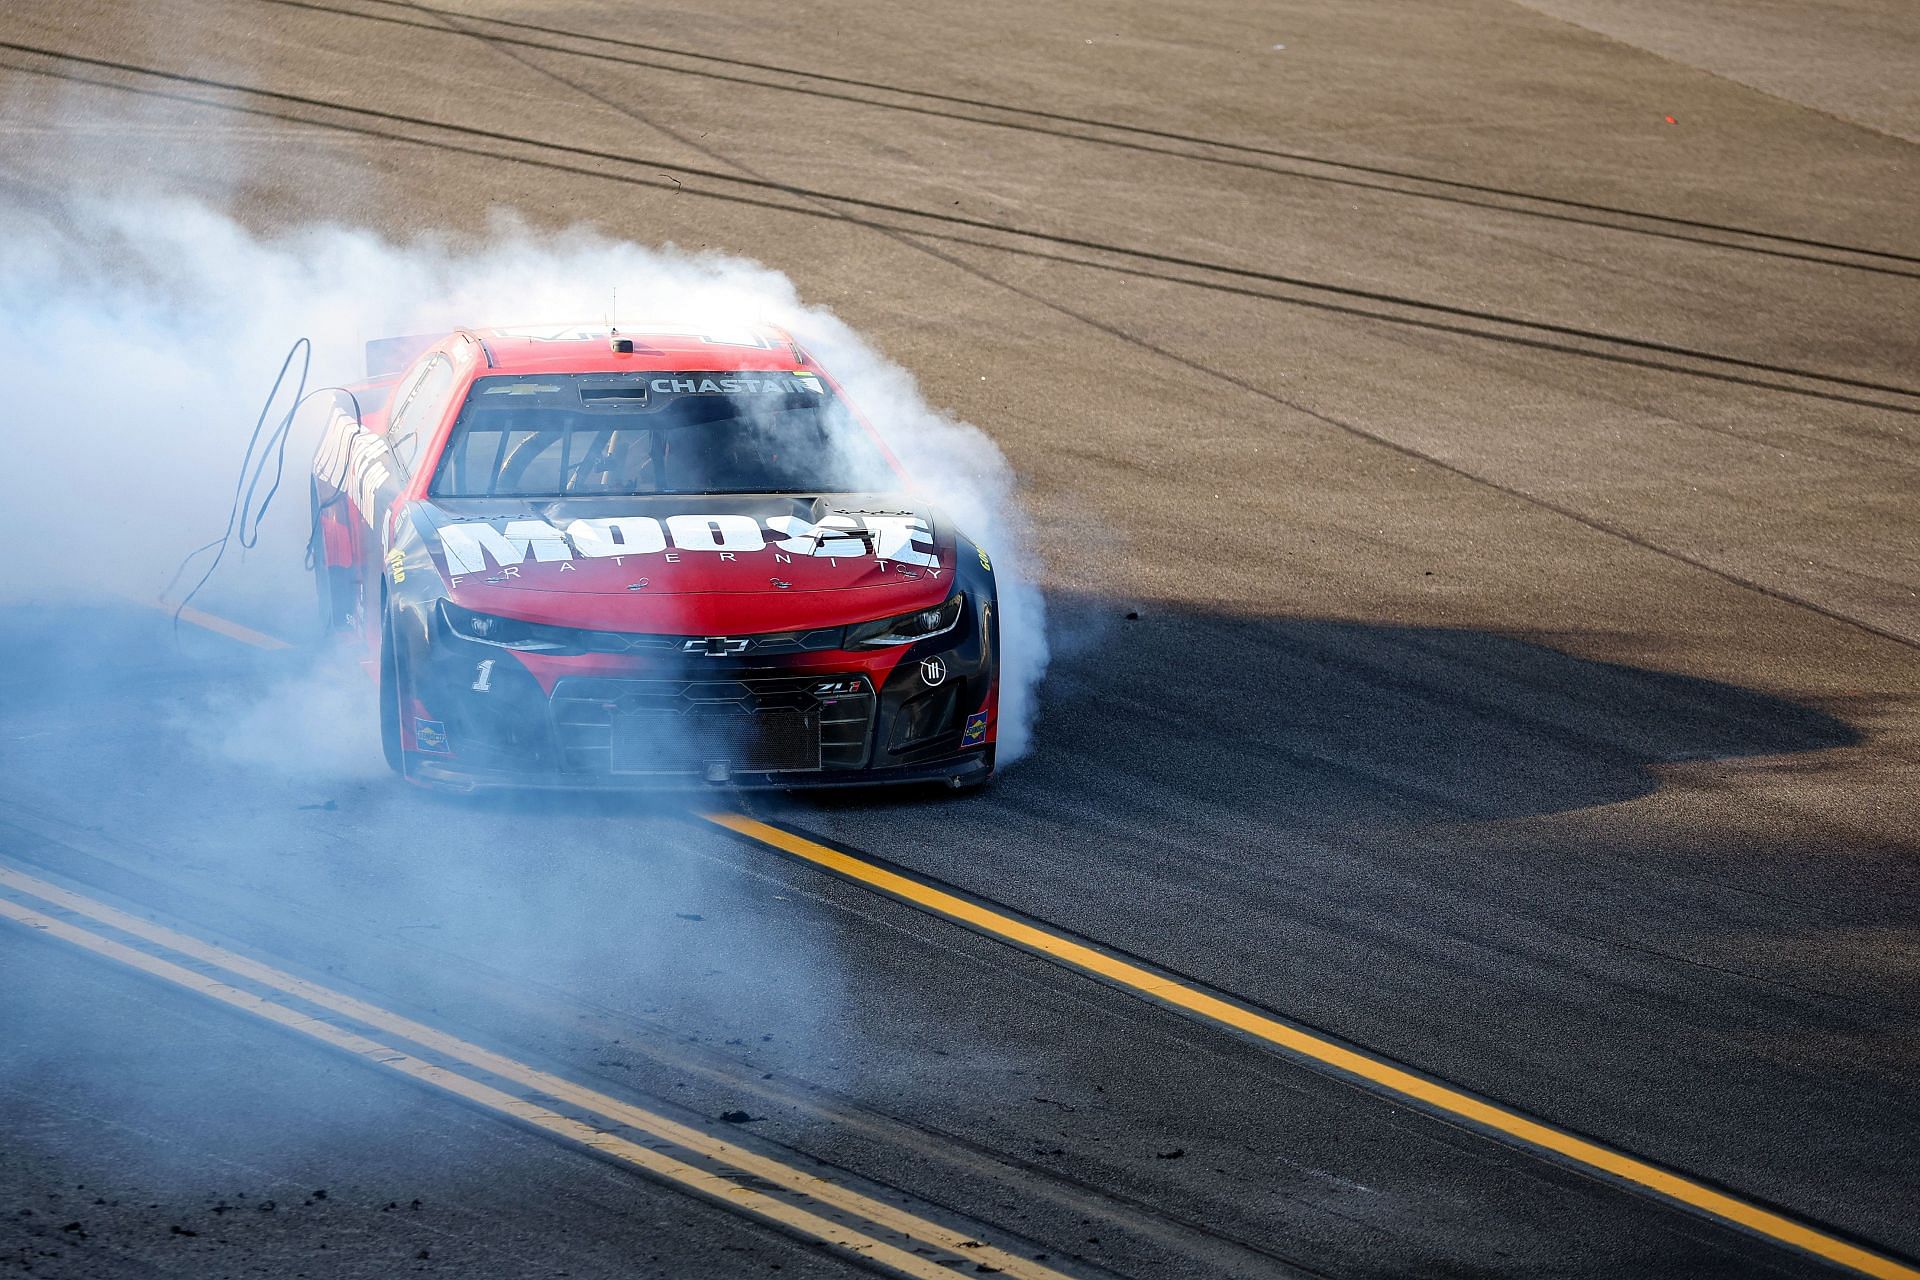 Ross Chastain celebrates with a burnout after winning the NASCAR Cup Series GEICO 500 at Talladega Superspeedway. (Photo by James Gilbert/Getty Images)